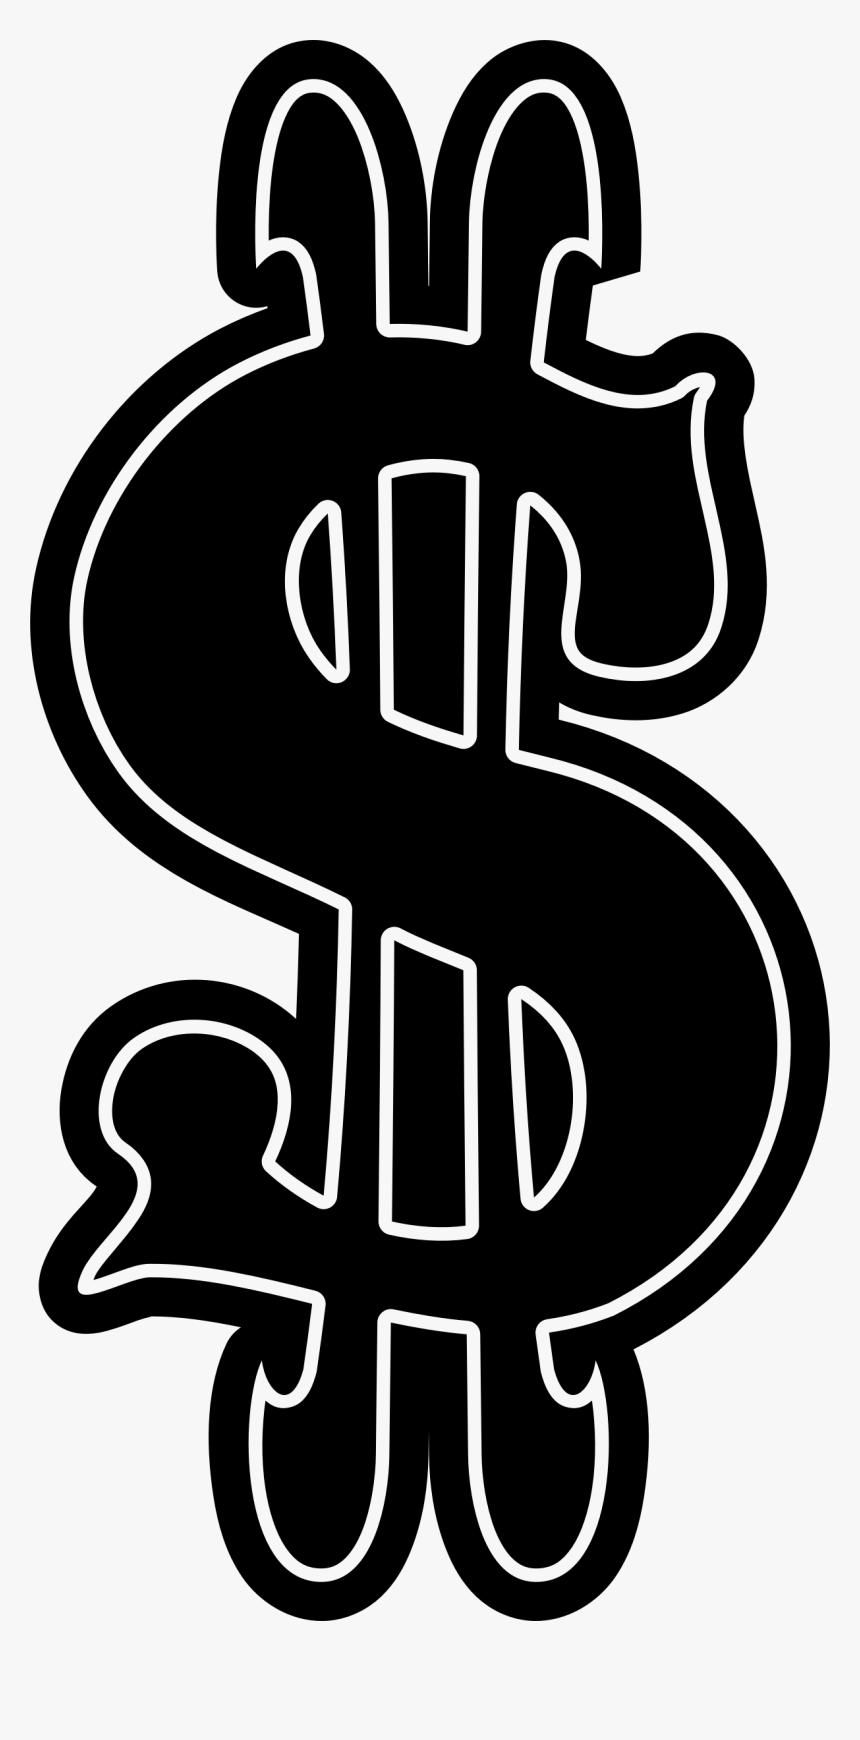 Dollar Signs Png - Dollar Black And White, Transparent Png, Free Download